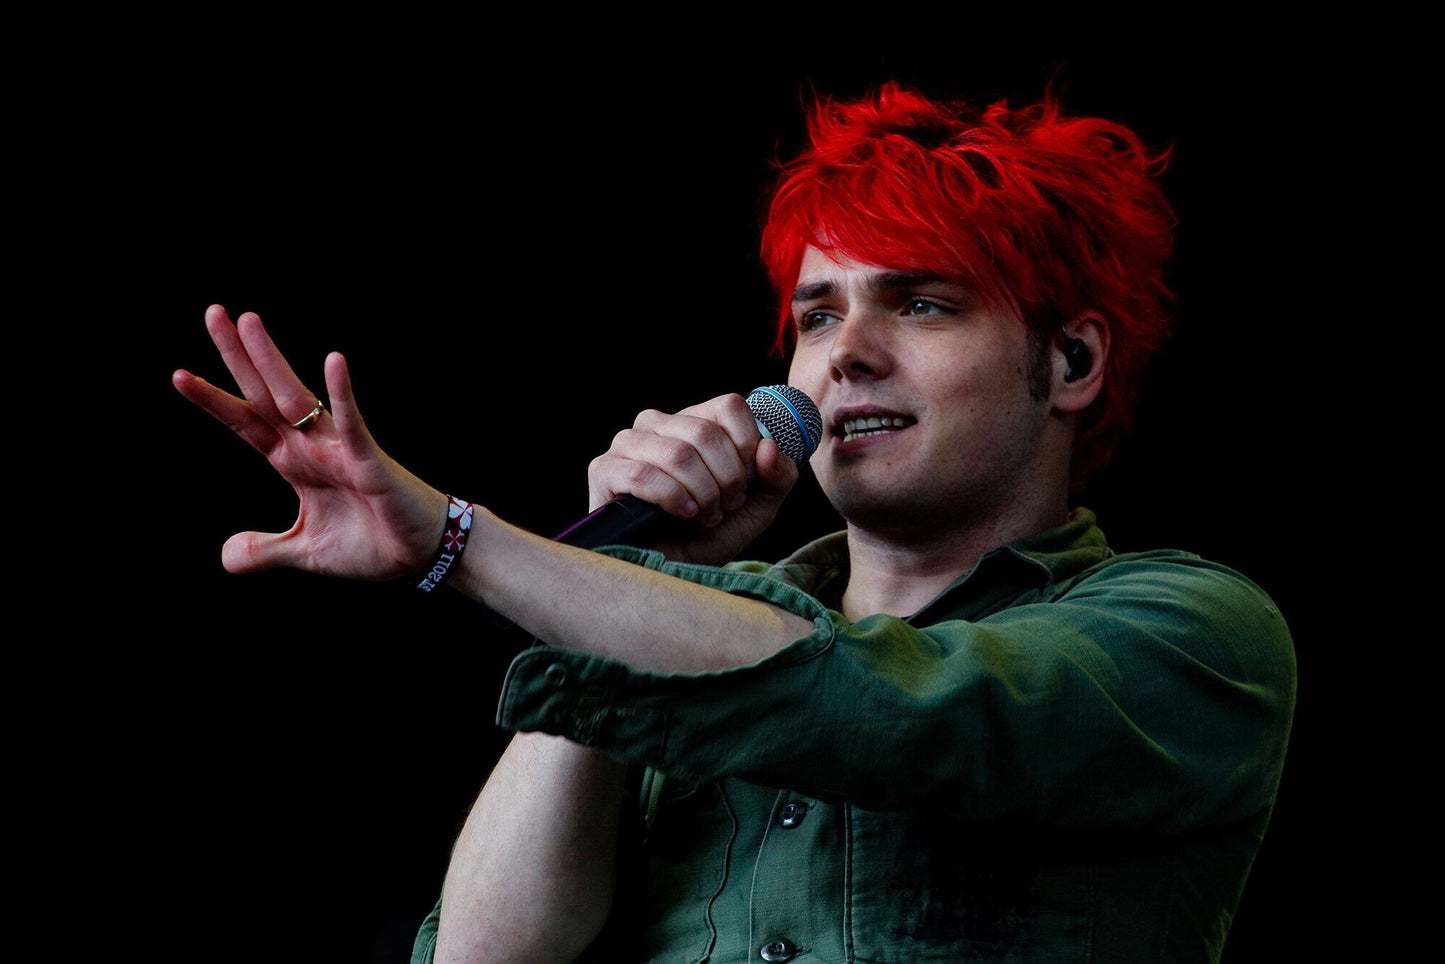 My Chemical Romance - Gerard Way's Stage Portrait with Red Hair, Scotland, 2011 Poster